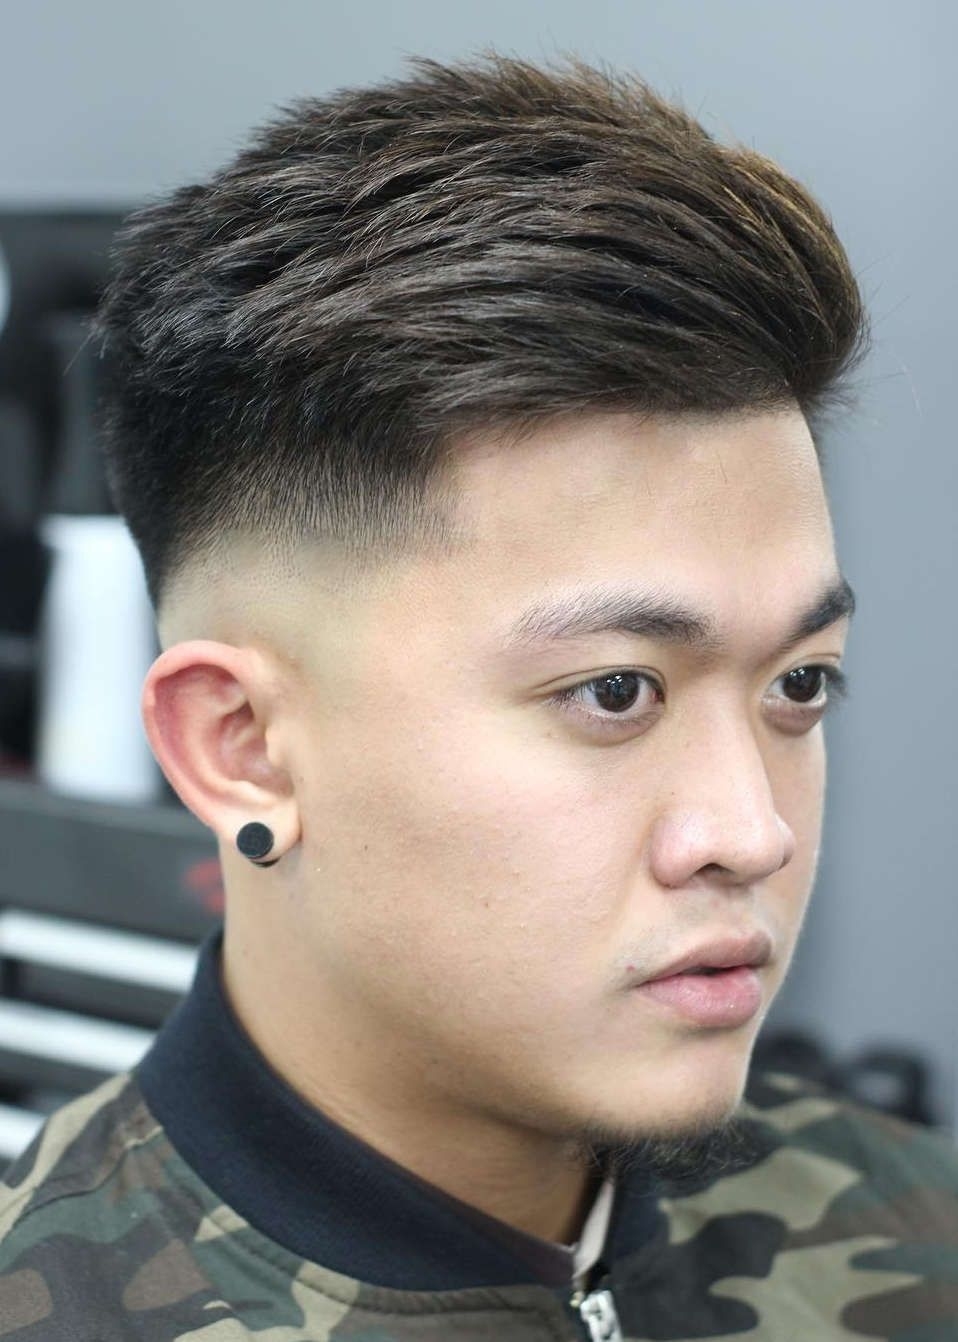 17 Most Popular Asian Hairstyles Men 2018 Yet You Know | Asian in Popular Asian Hairstyles For Guys